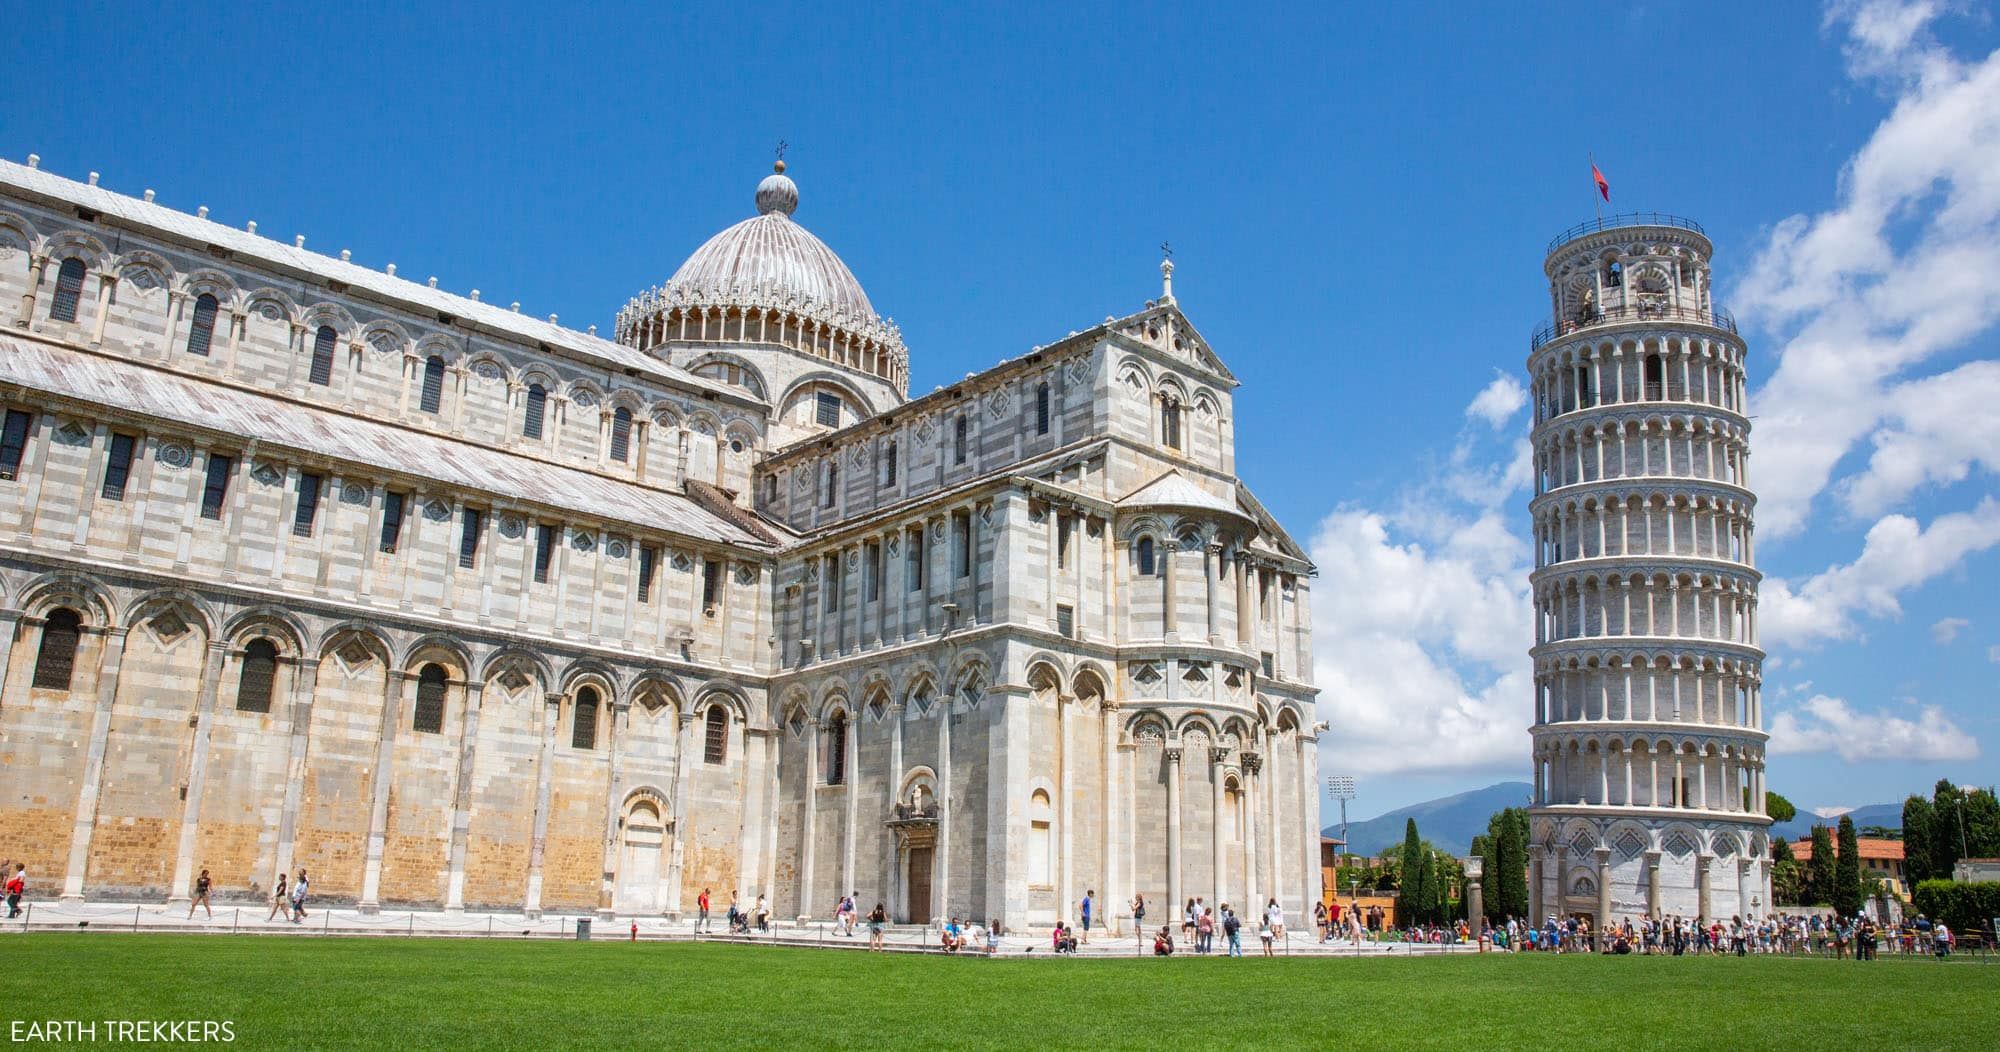 Featured image for “Leaning Tower of Pisa: Things to Do & How to Plan Your Day Trip”